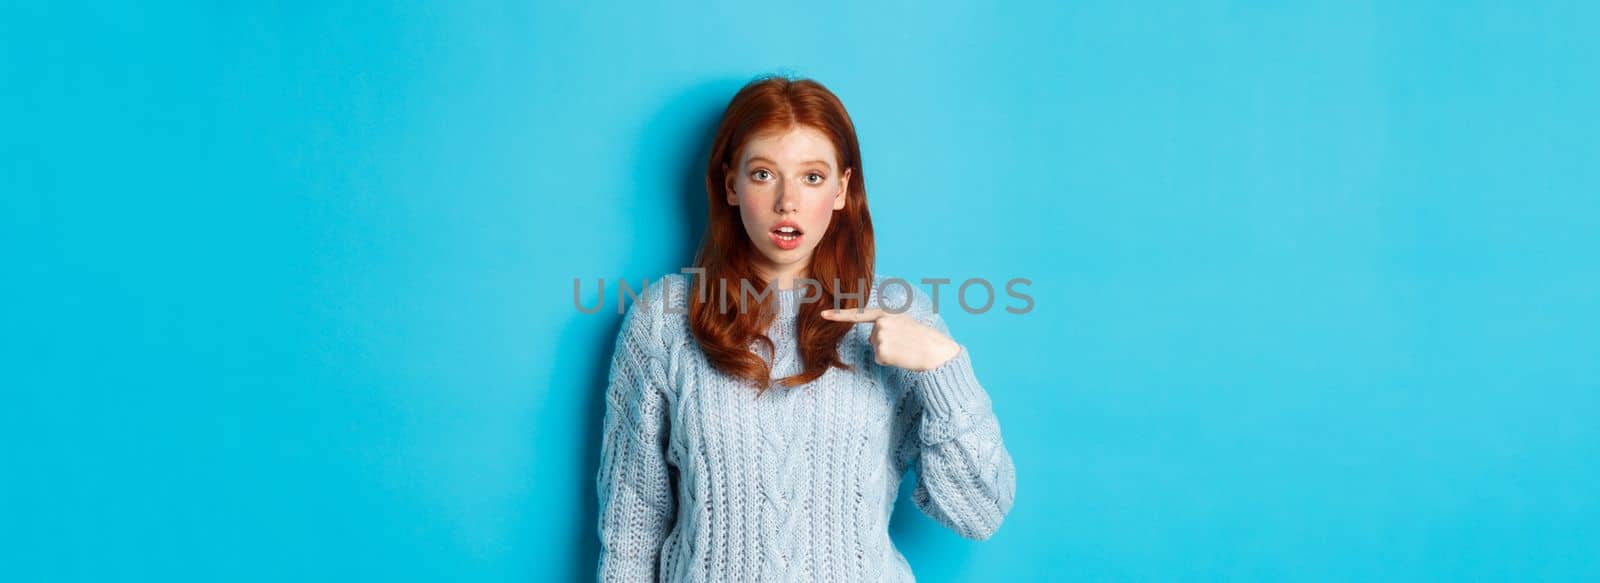 Confused redhead girl pointing at herself, being chosen, standing in sweater against blue background.